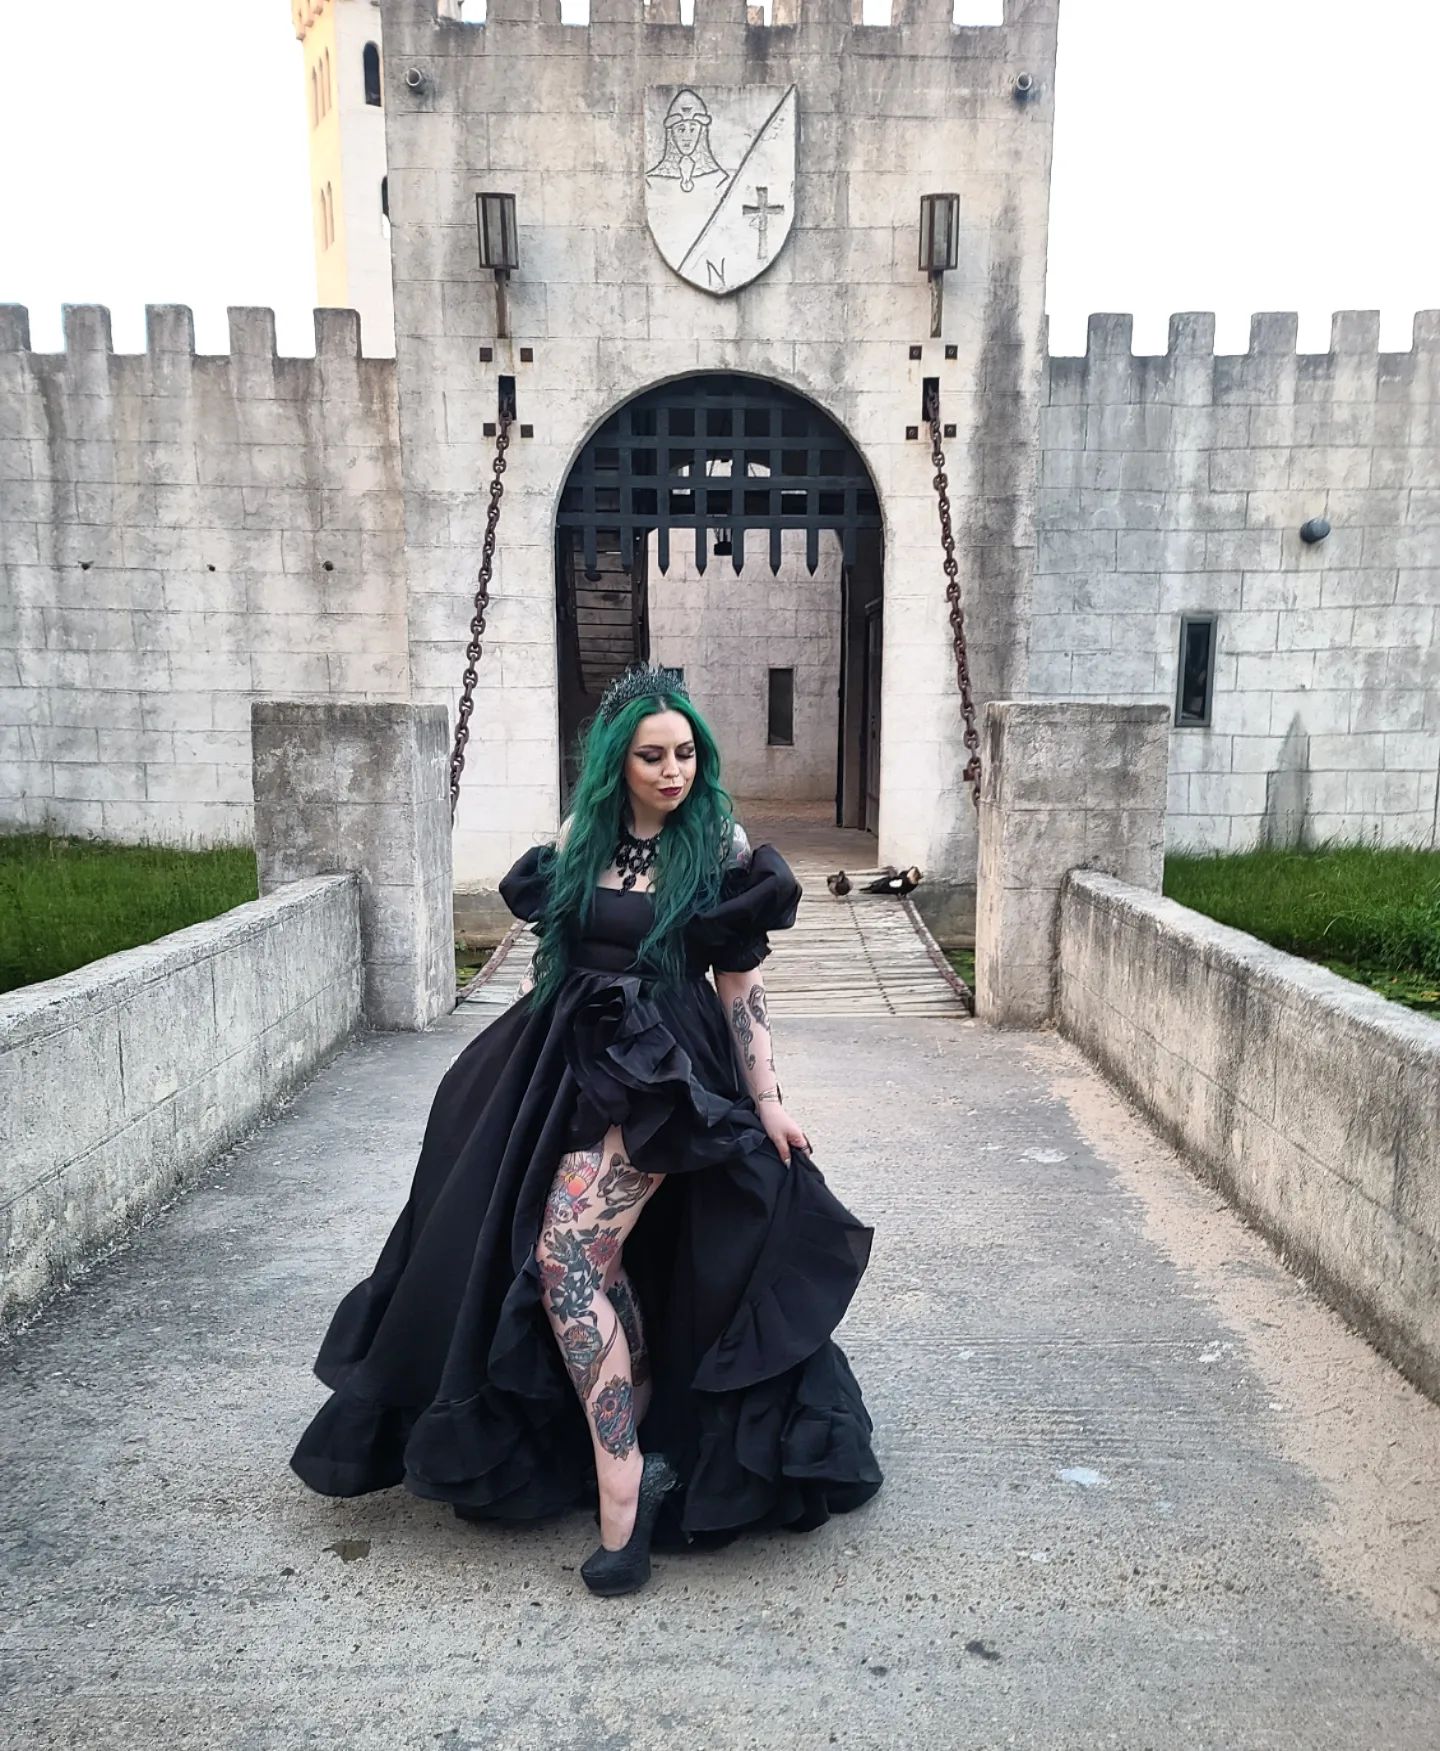 Just a queen doing queen shit at my castle. Typical Thursday.